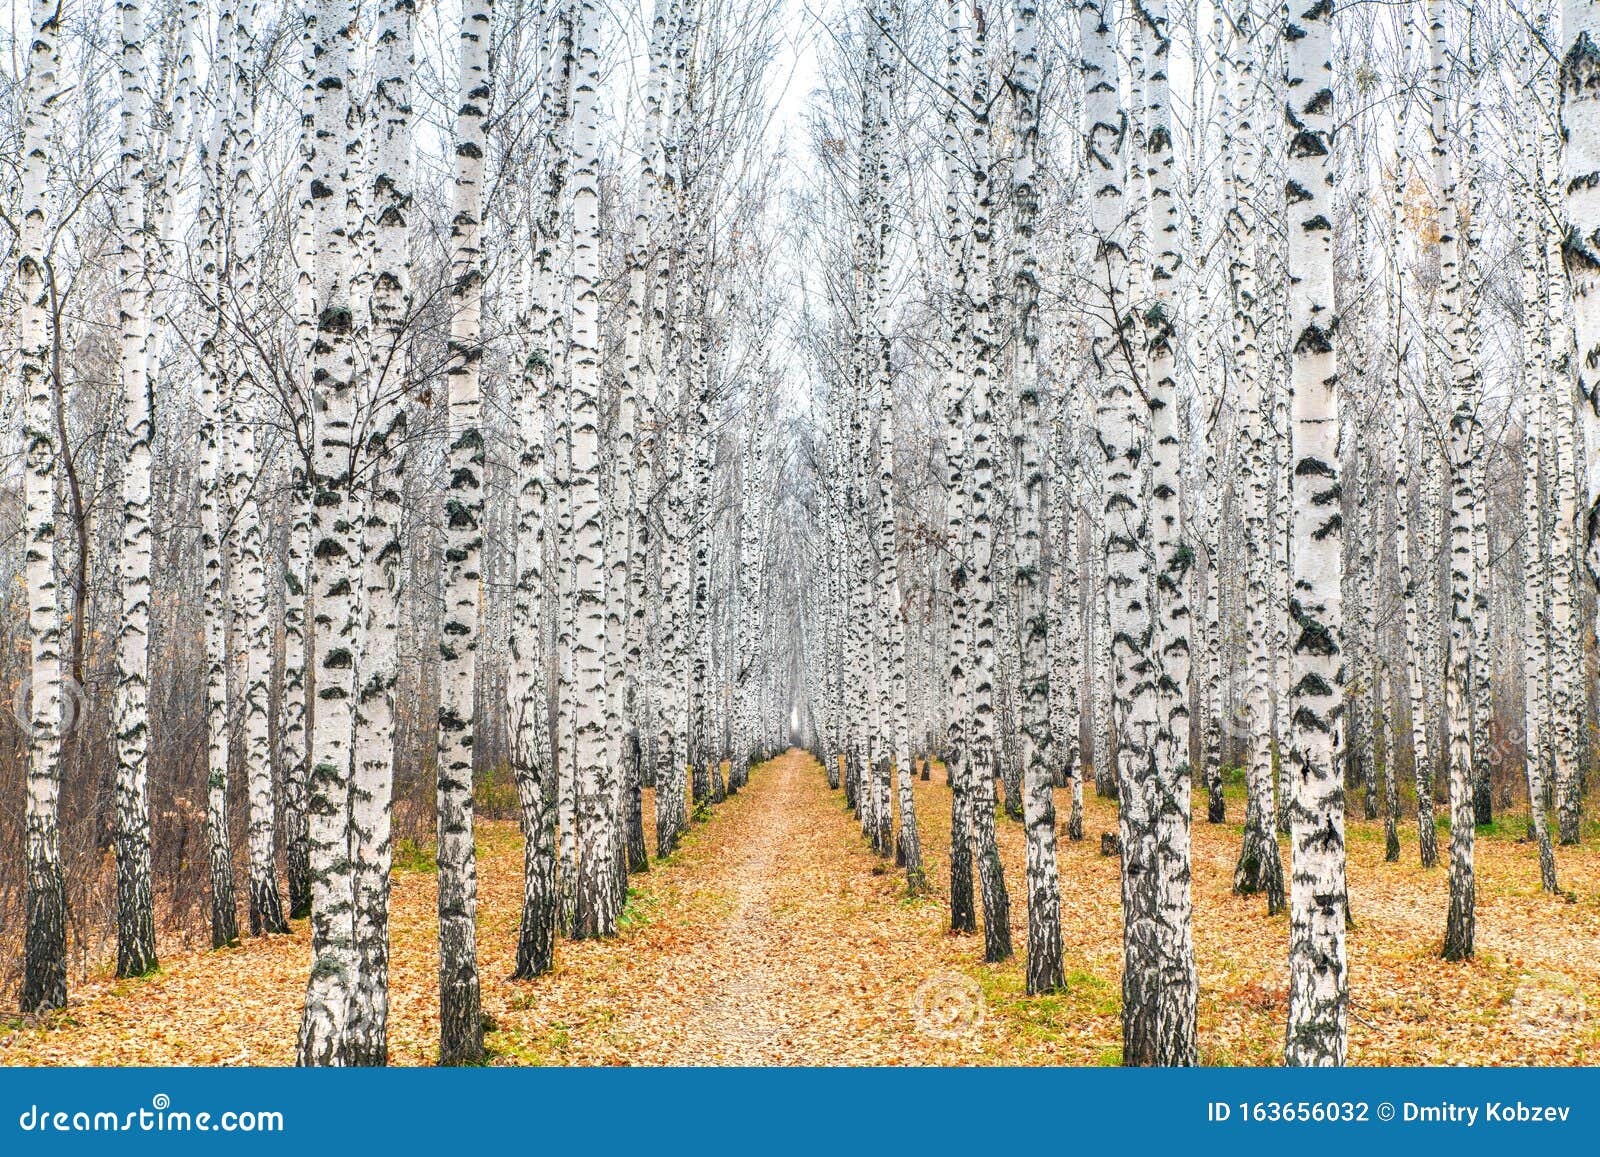 Autumn Landscape Of Birch Trunks Of Trees Without Leaves Stock Photo